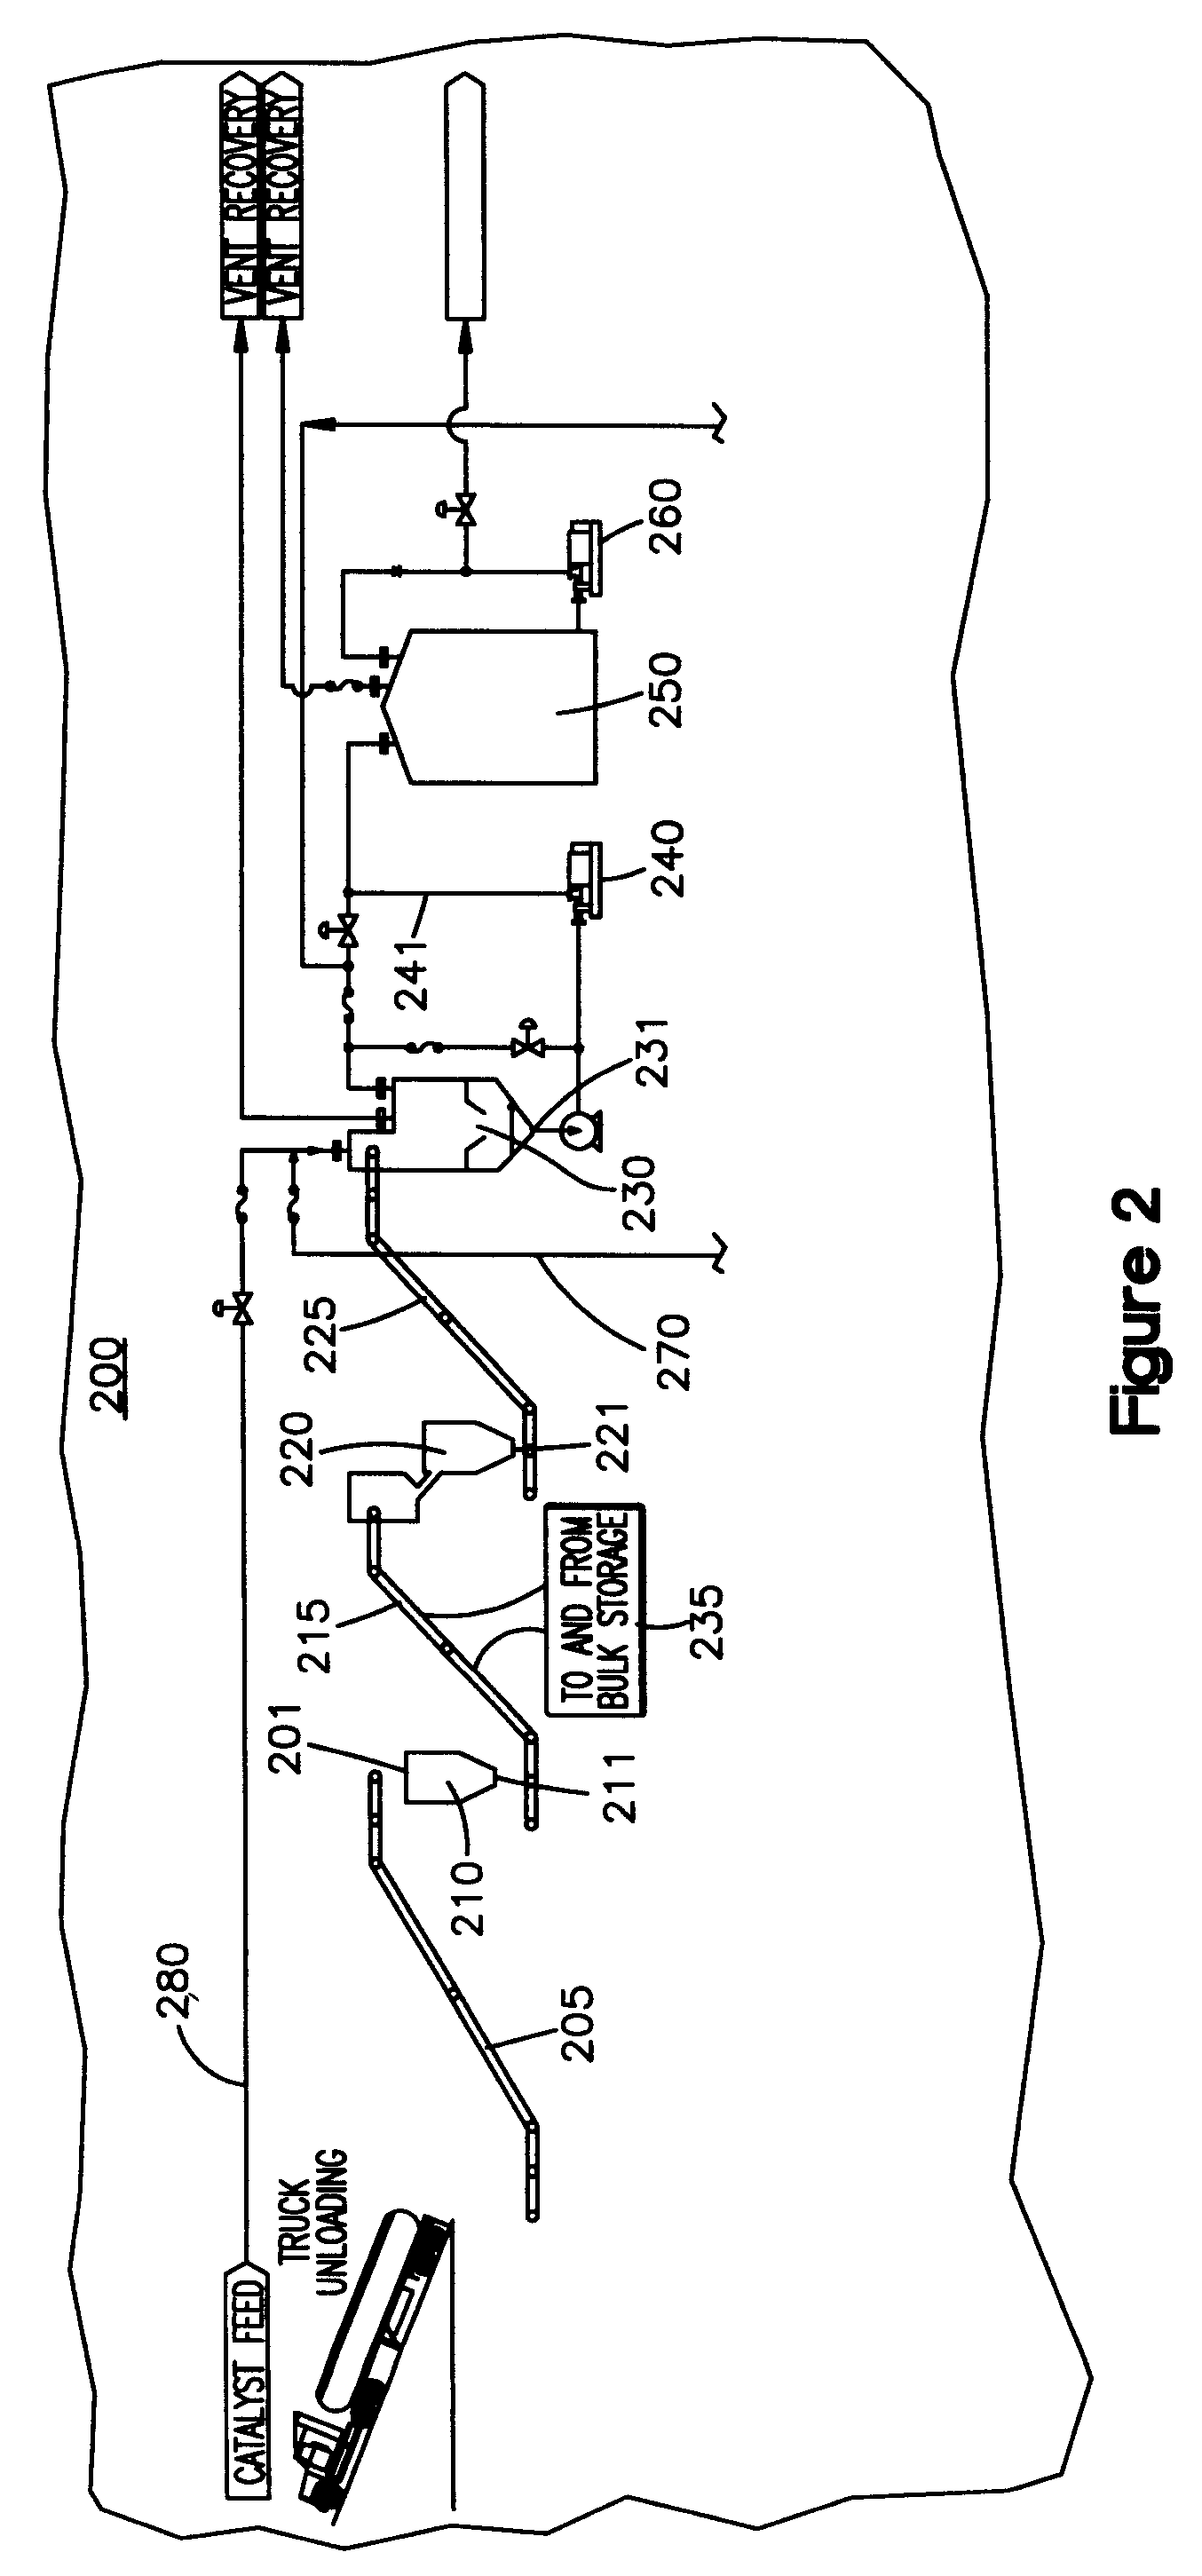 Method for the production of synthetic fuels